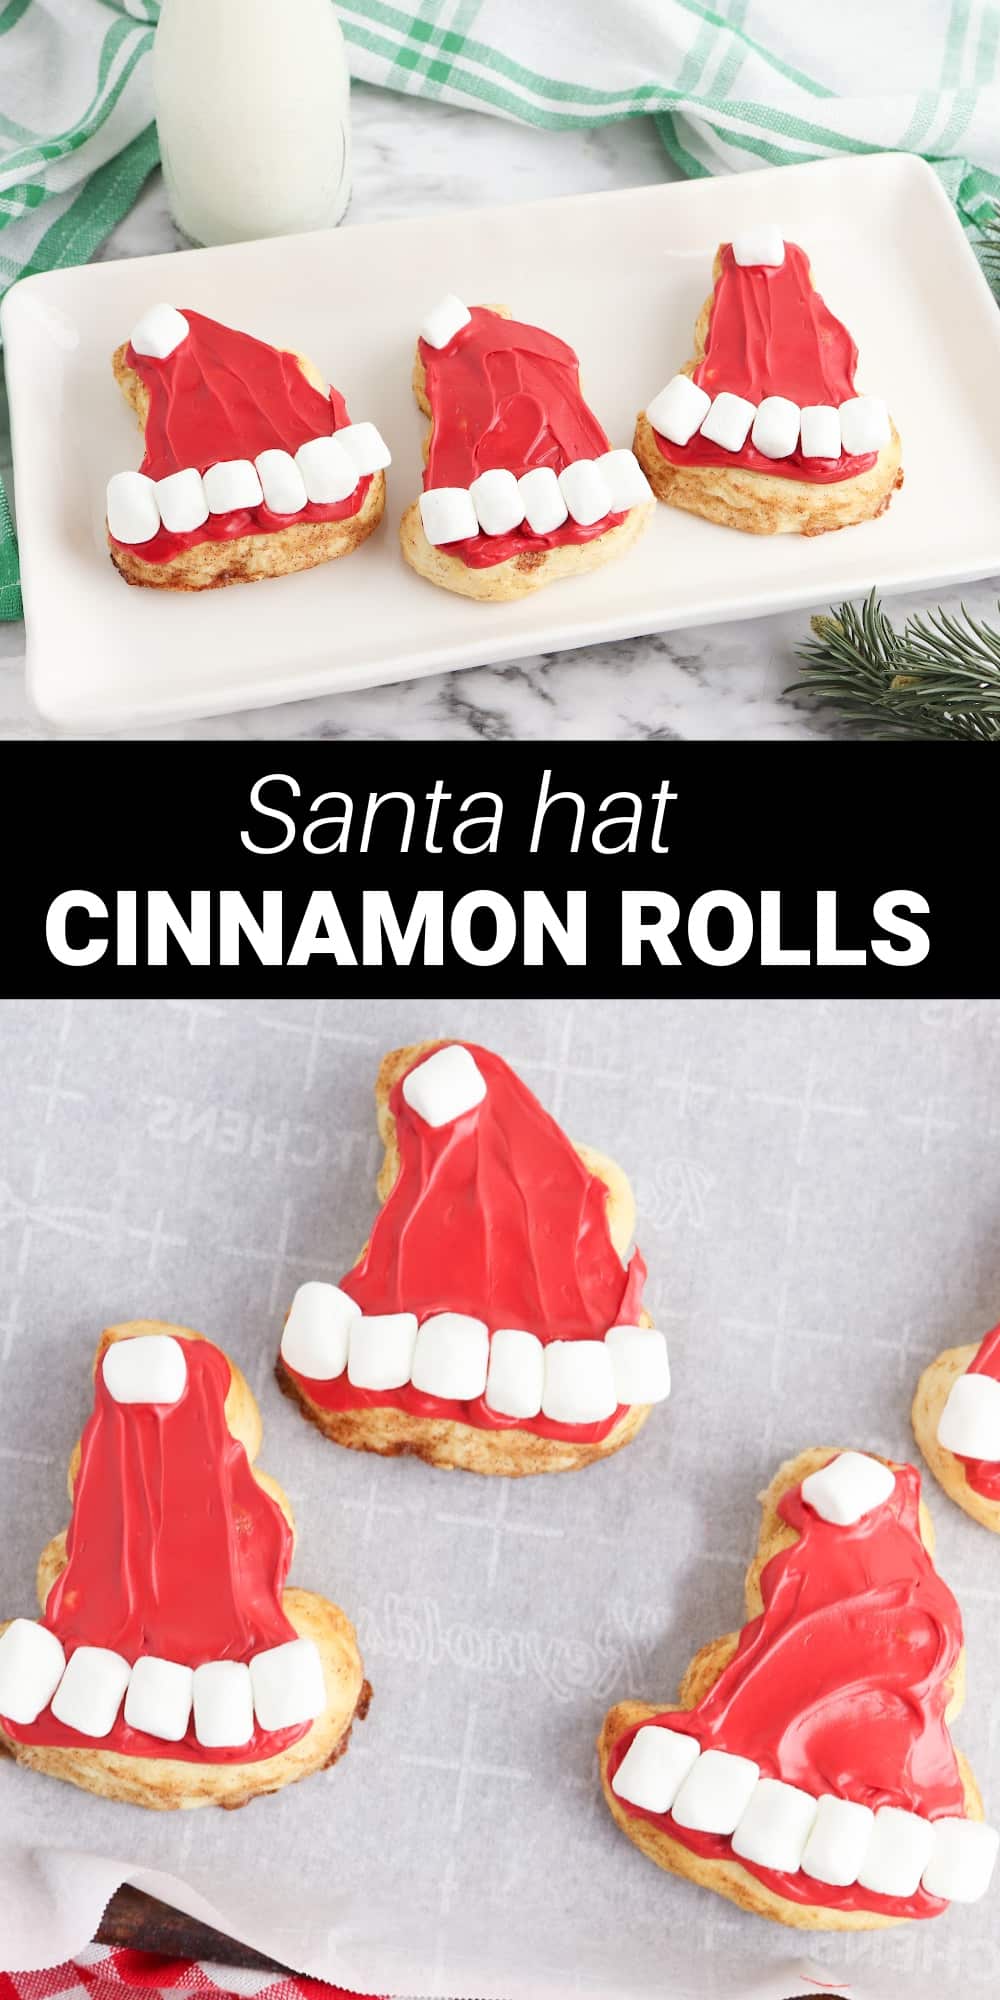 These adorable Santa Hat Cinnamon Rolls make a super festive Christmas morning breakfast. Made with canned cinnamon rolls and a couple of decorative finishes, they're so much fun to make and so easy that they're the perfect activity for kids too! Just bake the cinnamon rolls and let their little hands to go work. 